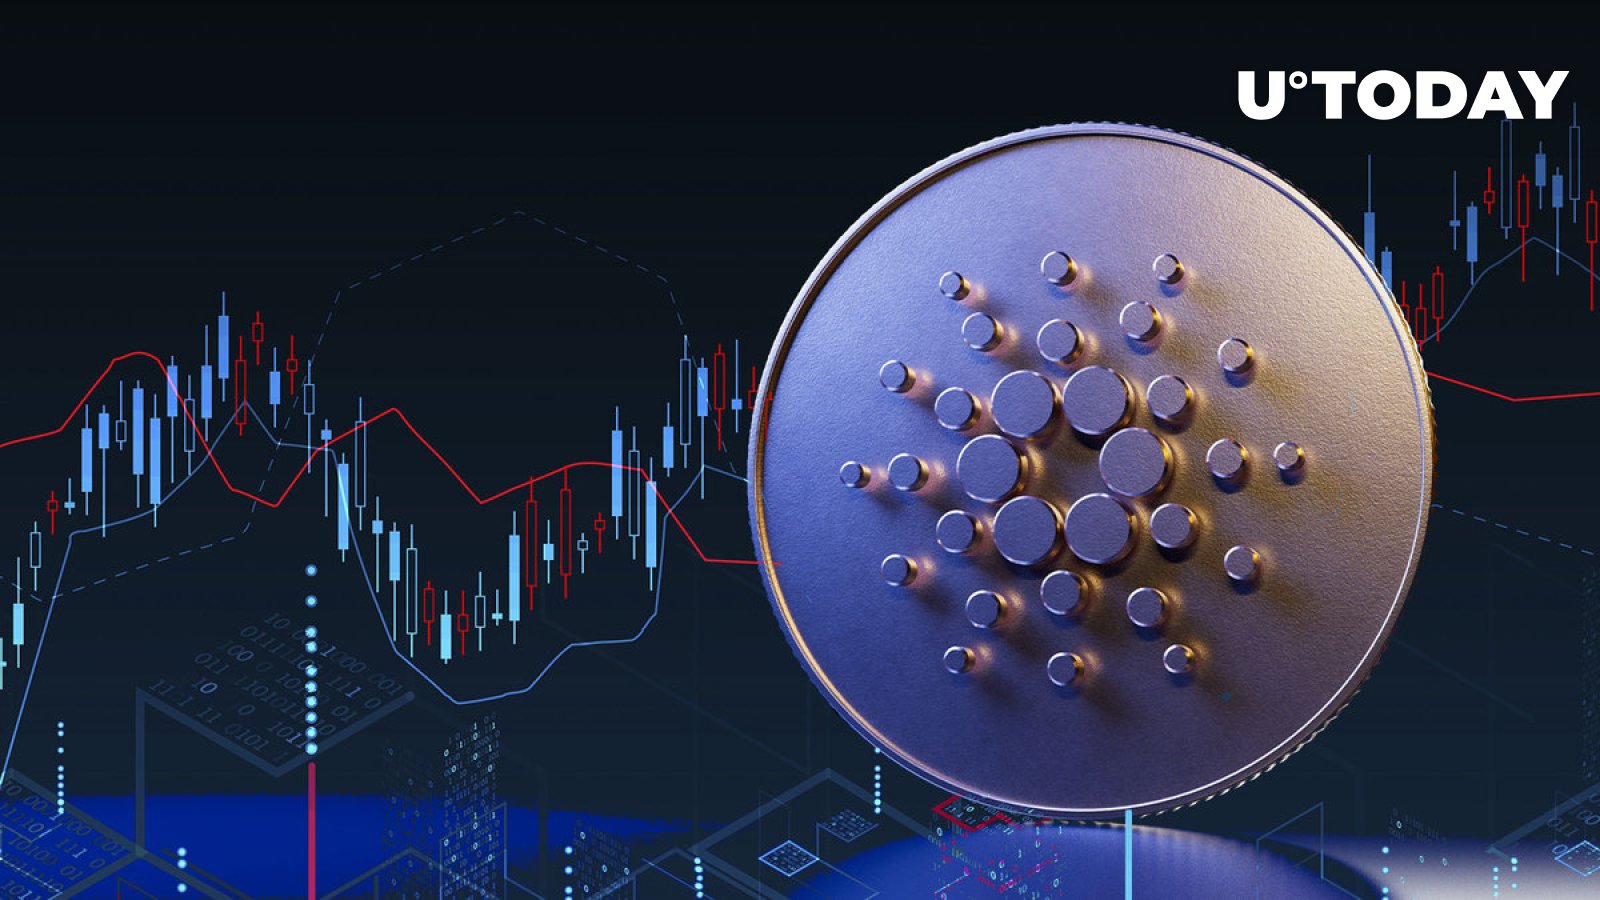 Cardano DEX Sees 788% Growth in User Activity Post-Vasil: Details